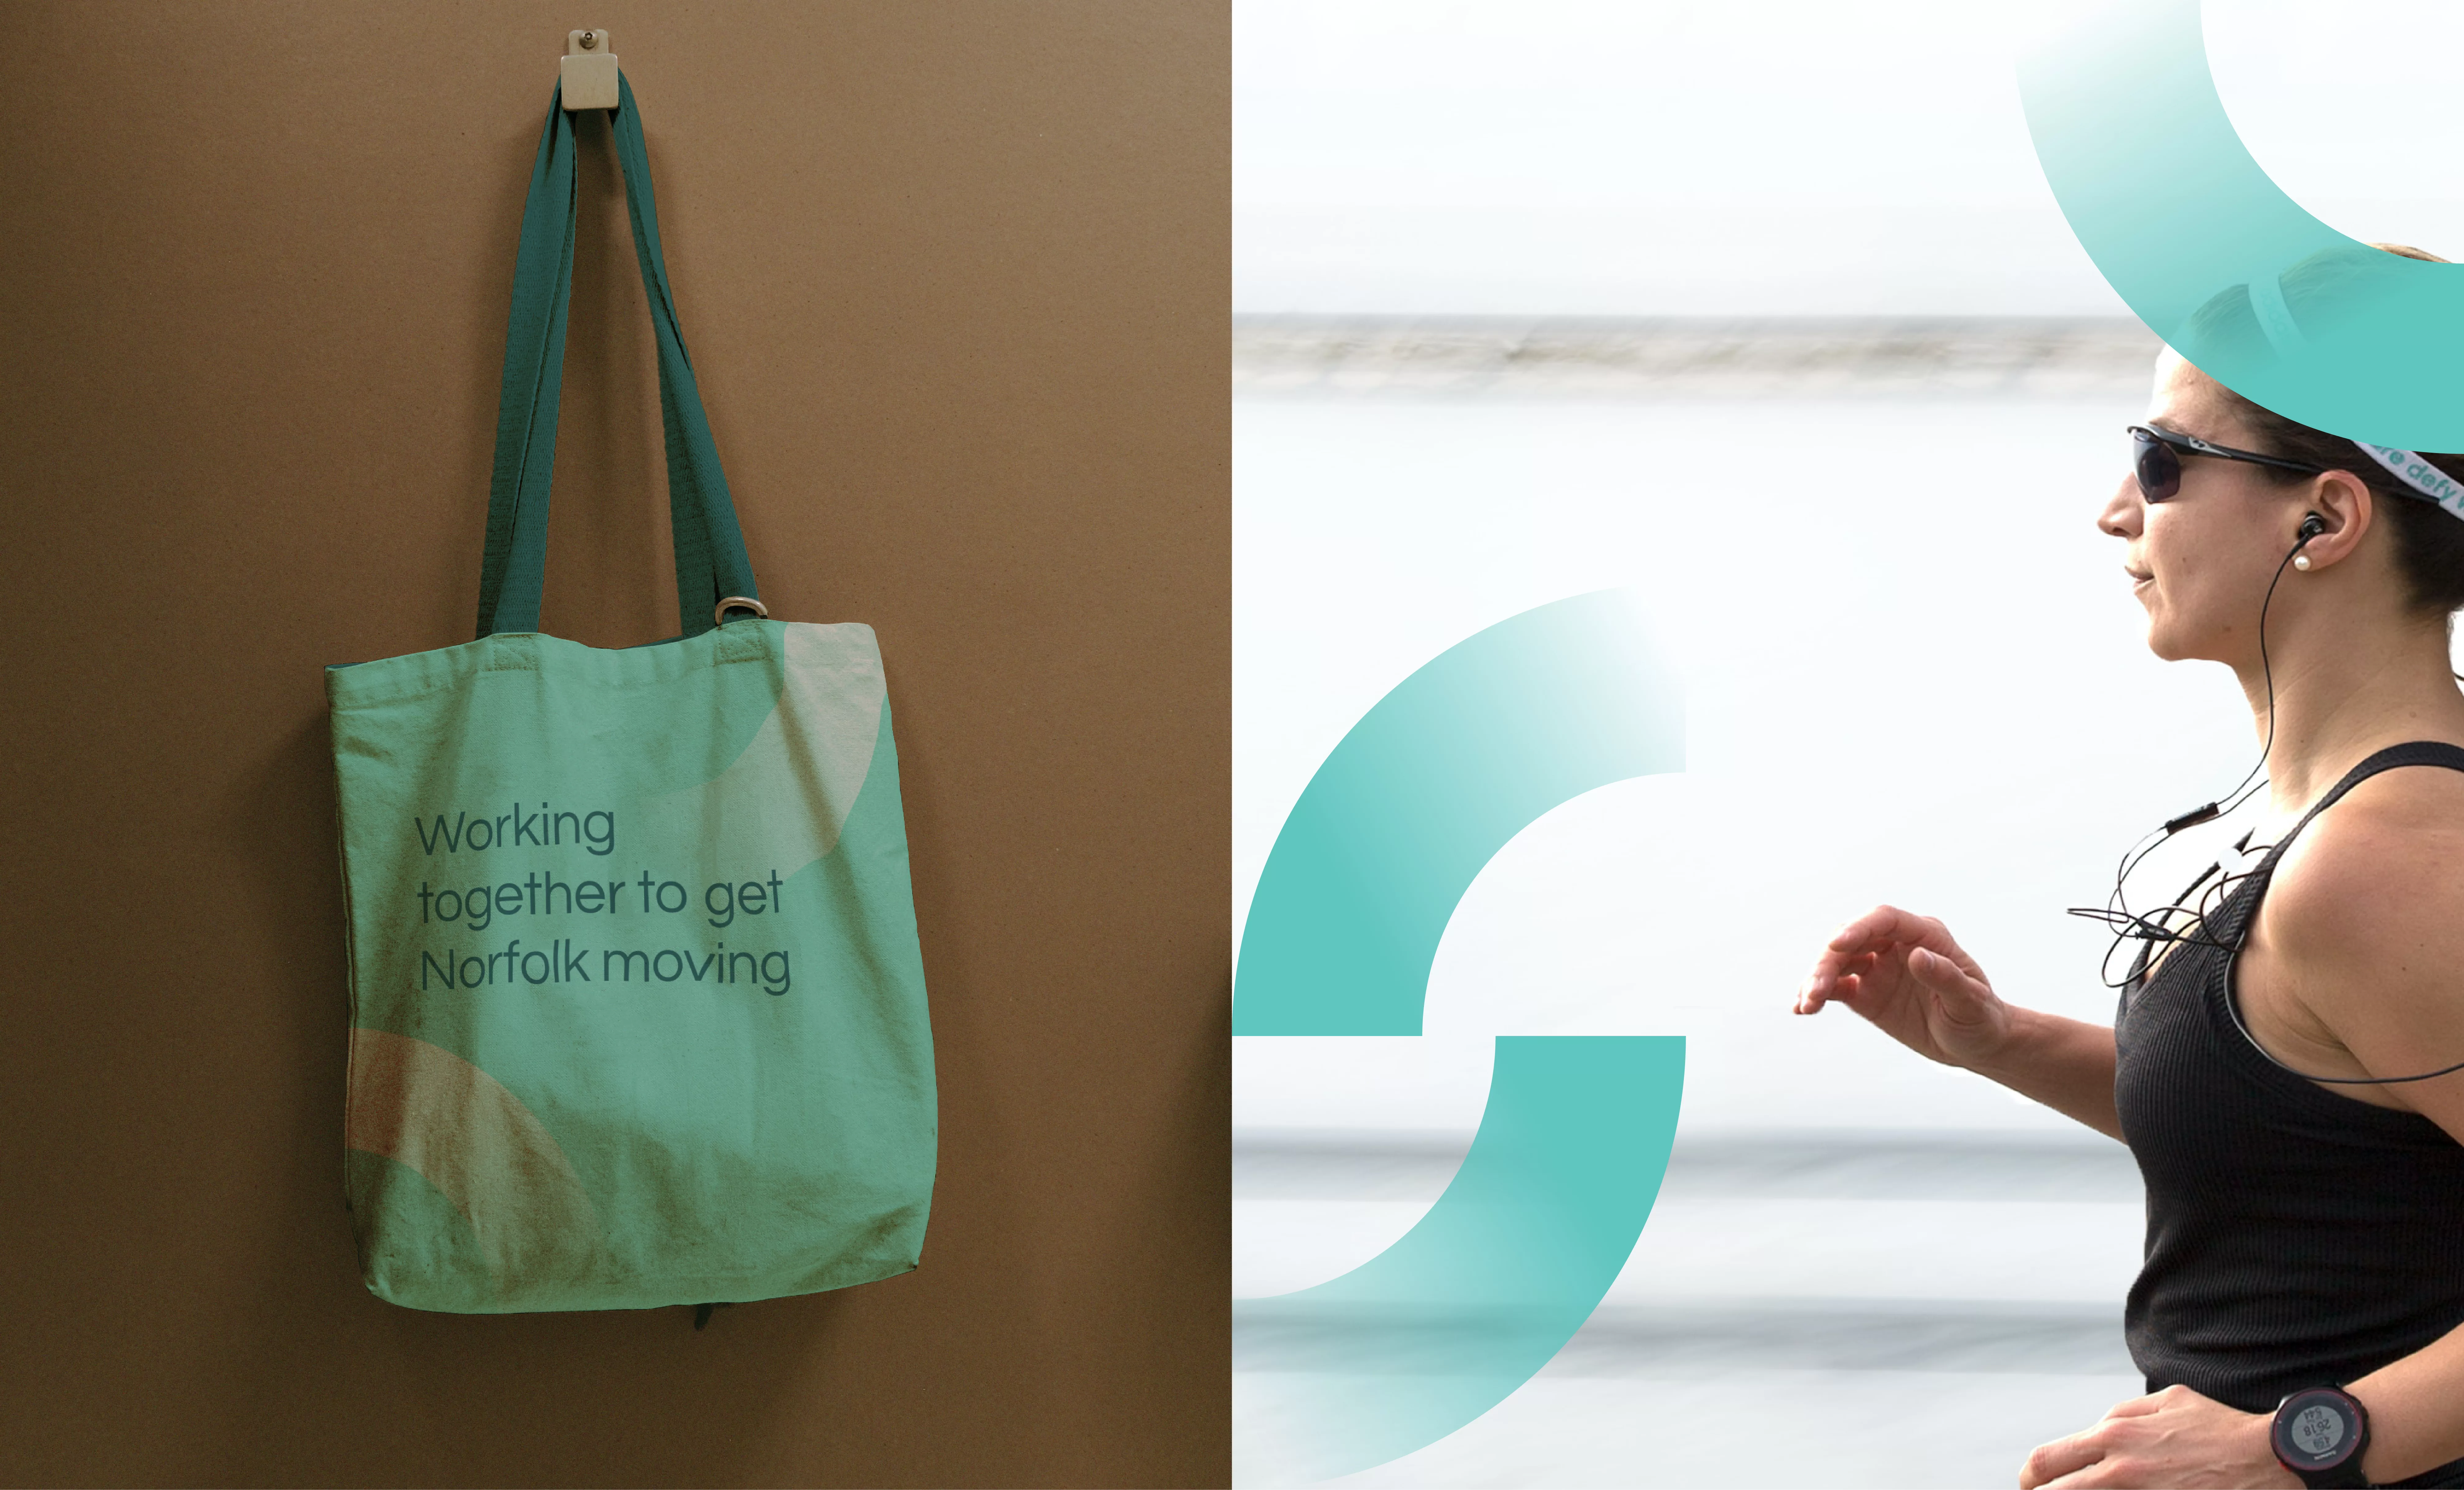 Working together to get norfolk moving tote bag with woman running